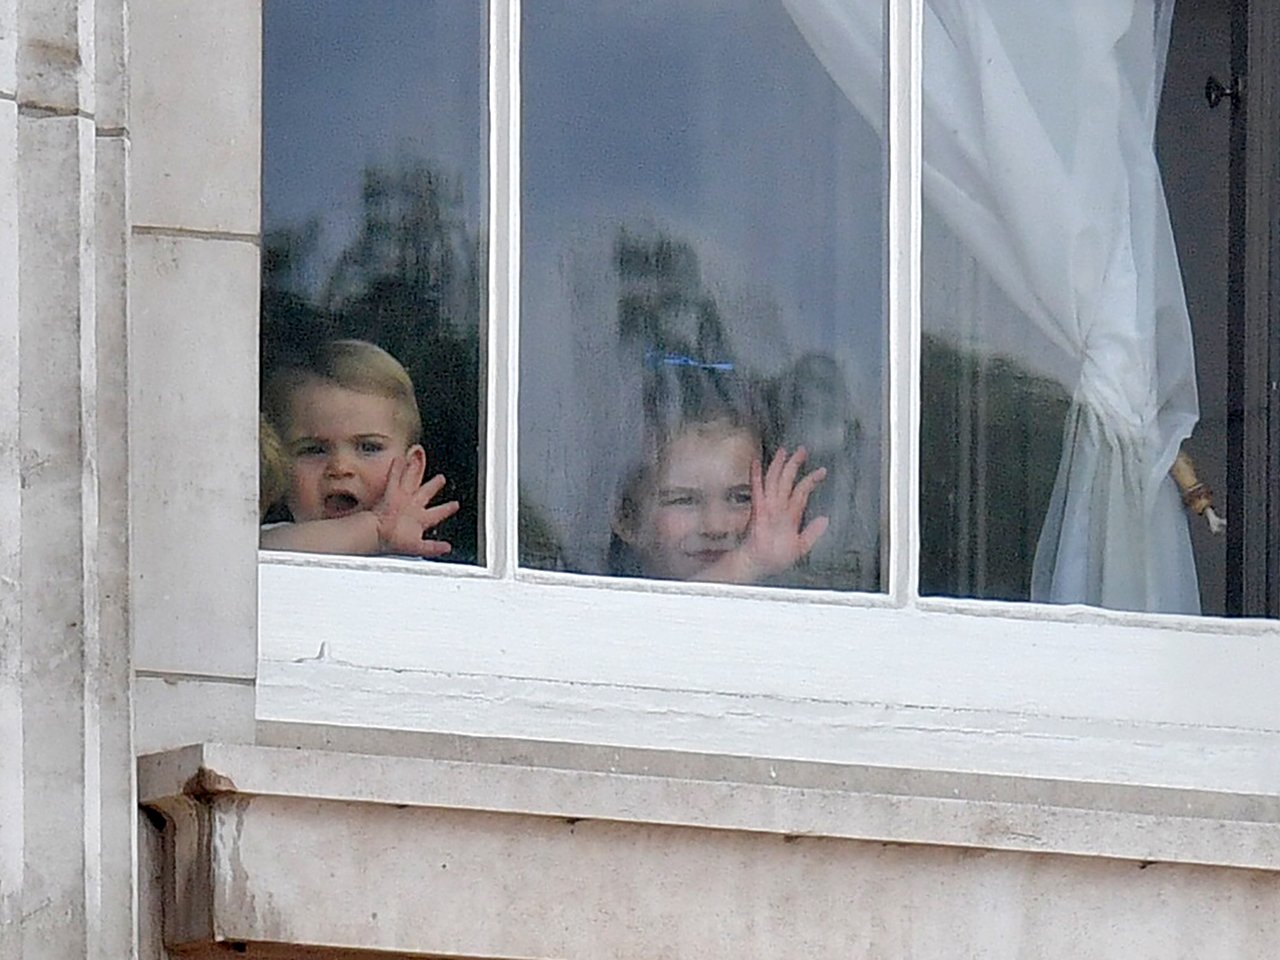 prince louis and princess charlotte waving in the window